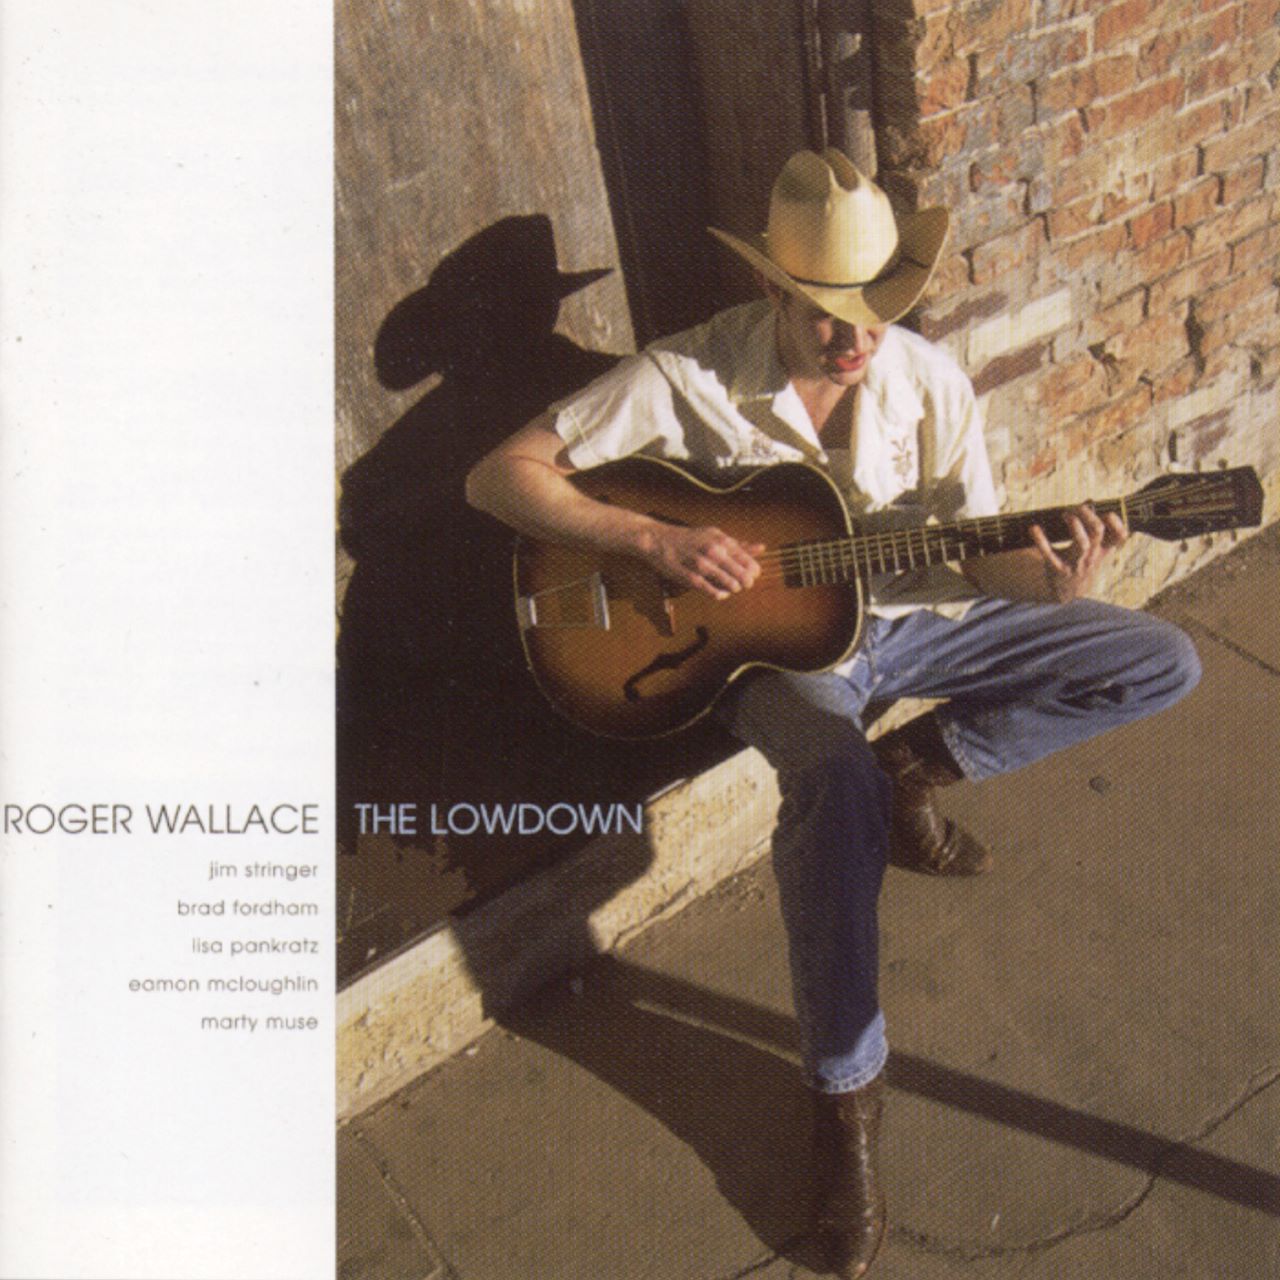 Roger Wallace - The Lowdown cover album